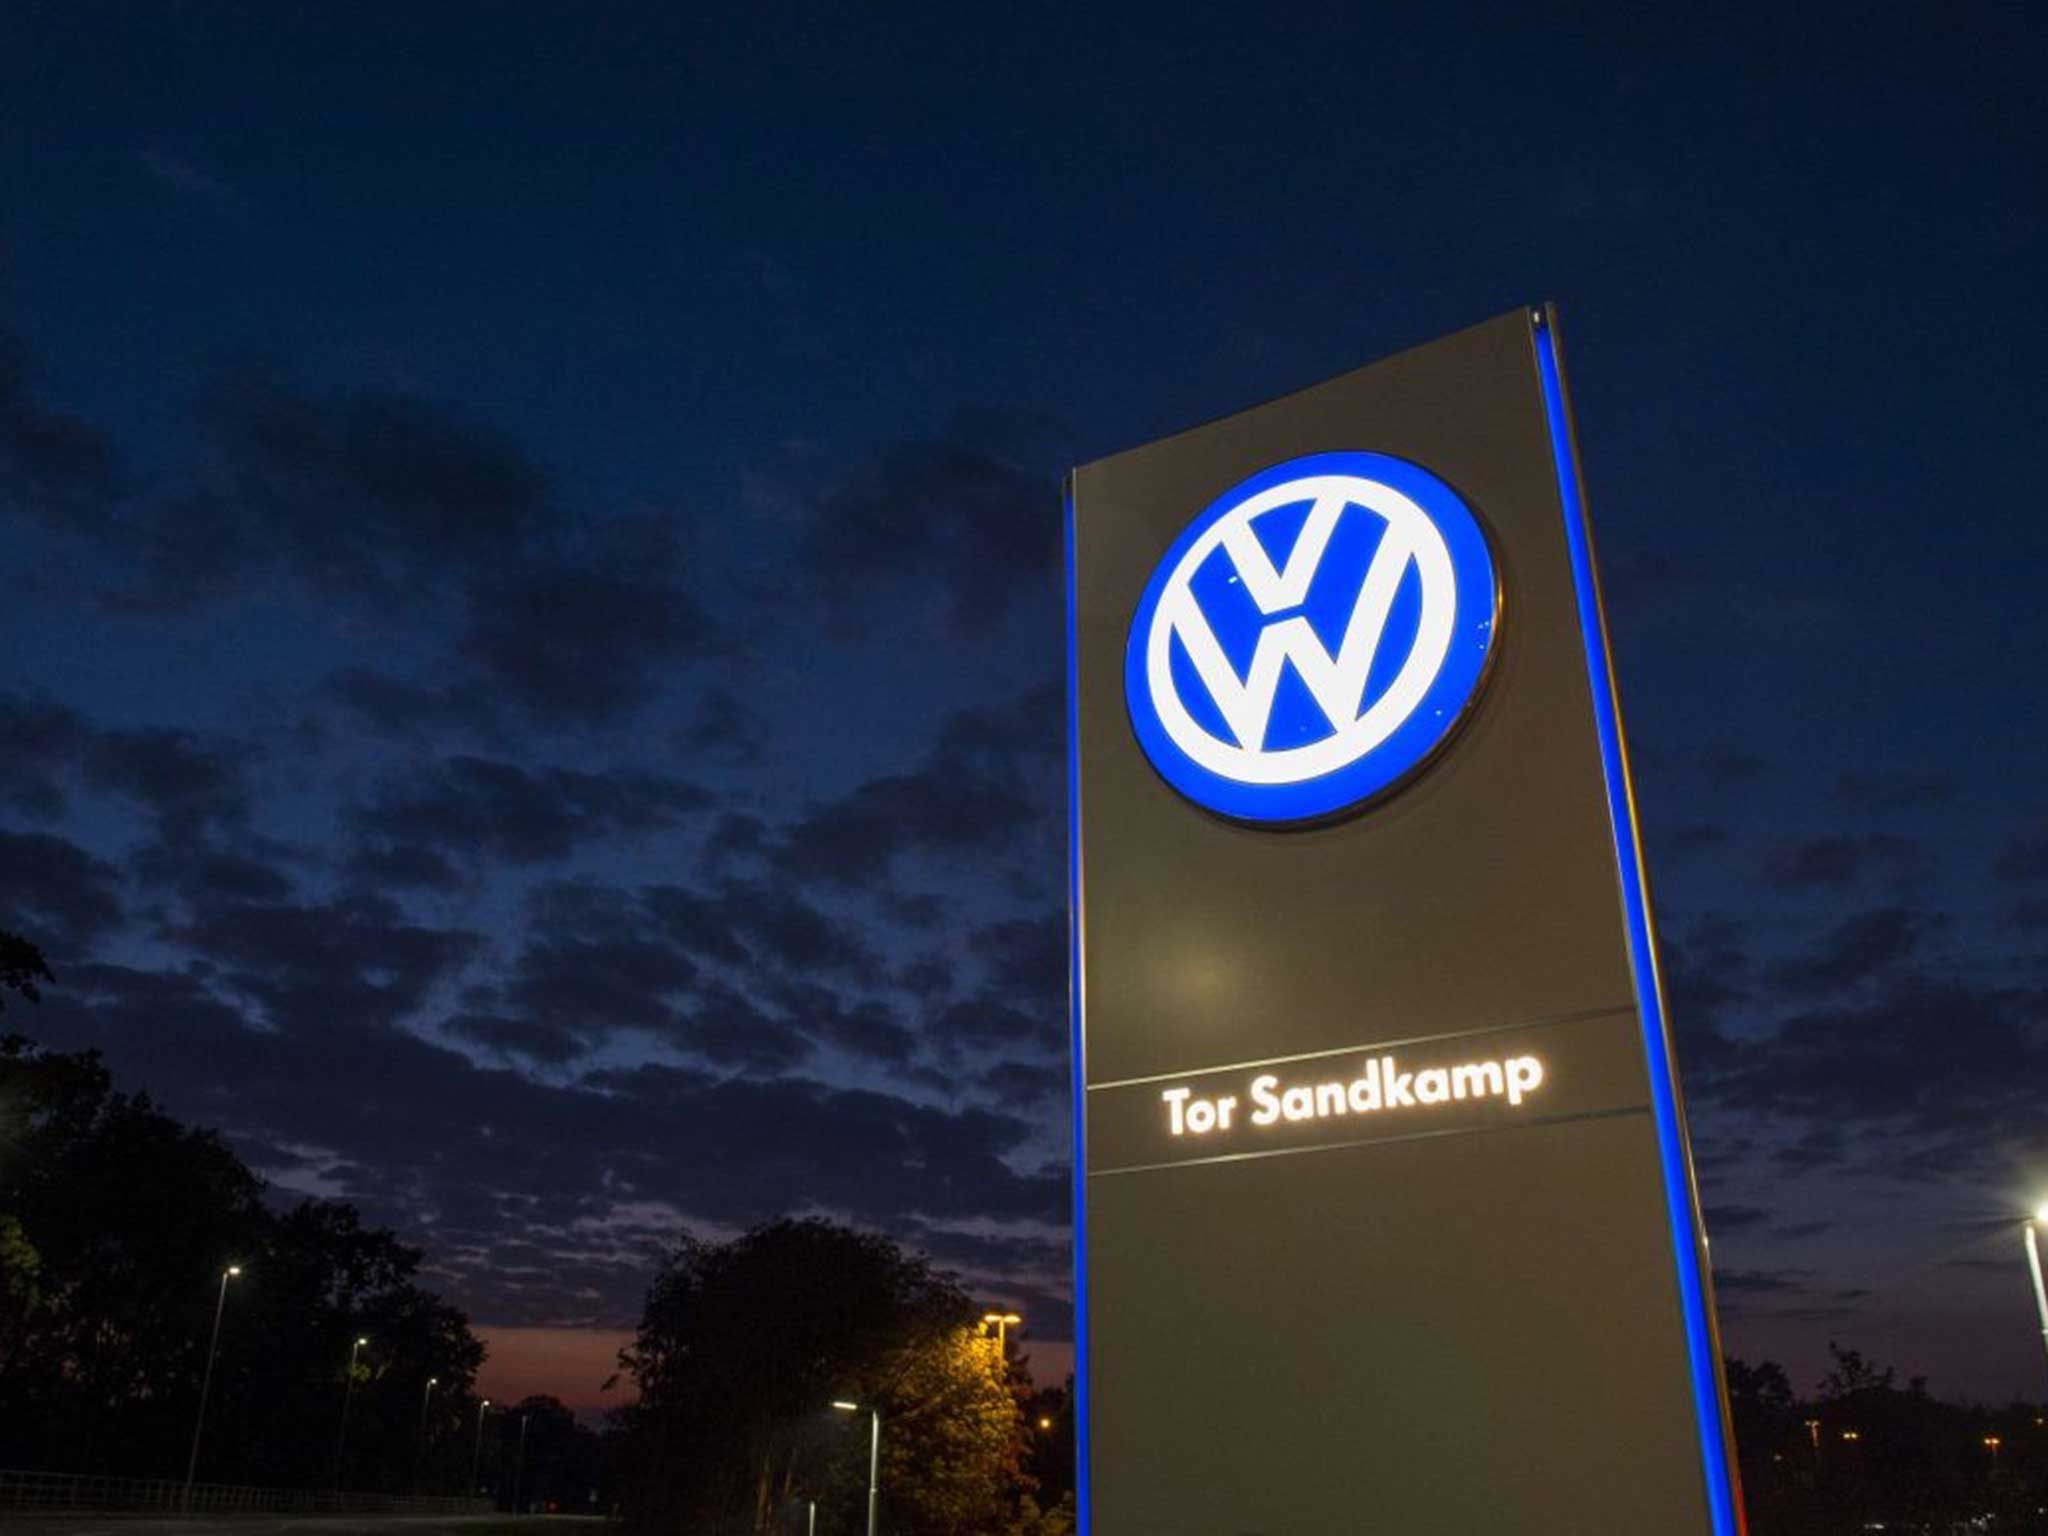 Volkswagen is one of the biggest car manufacturers in the world